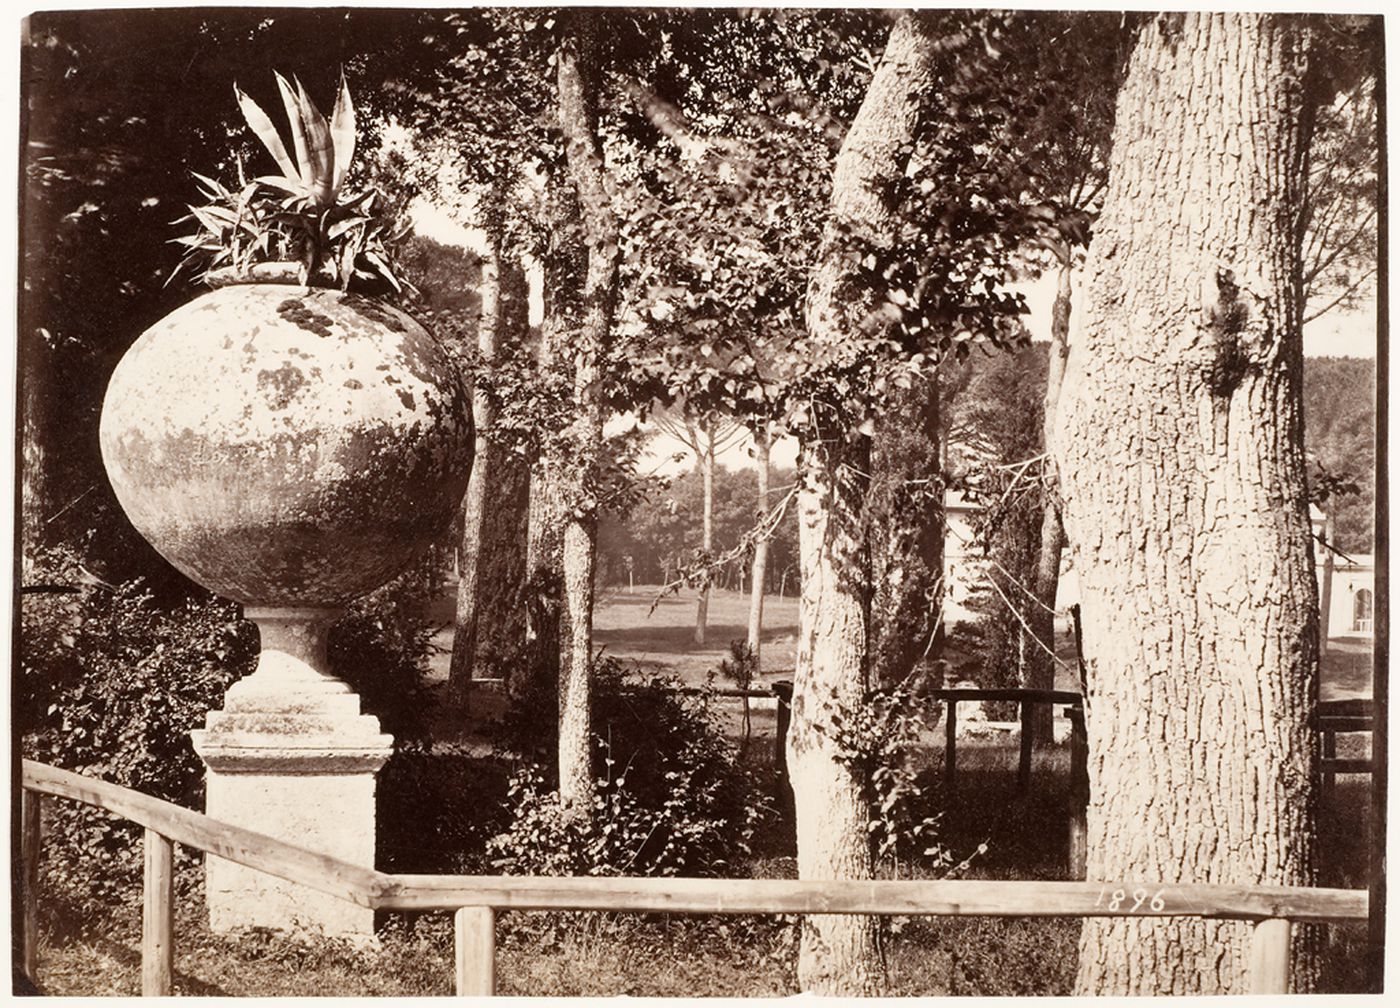 Landscape and garden study showing park with urn, Italy